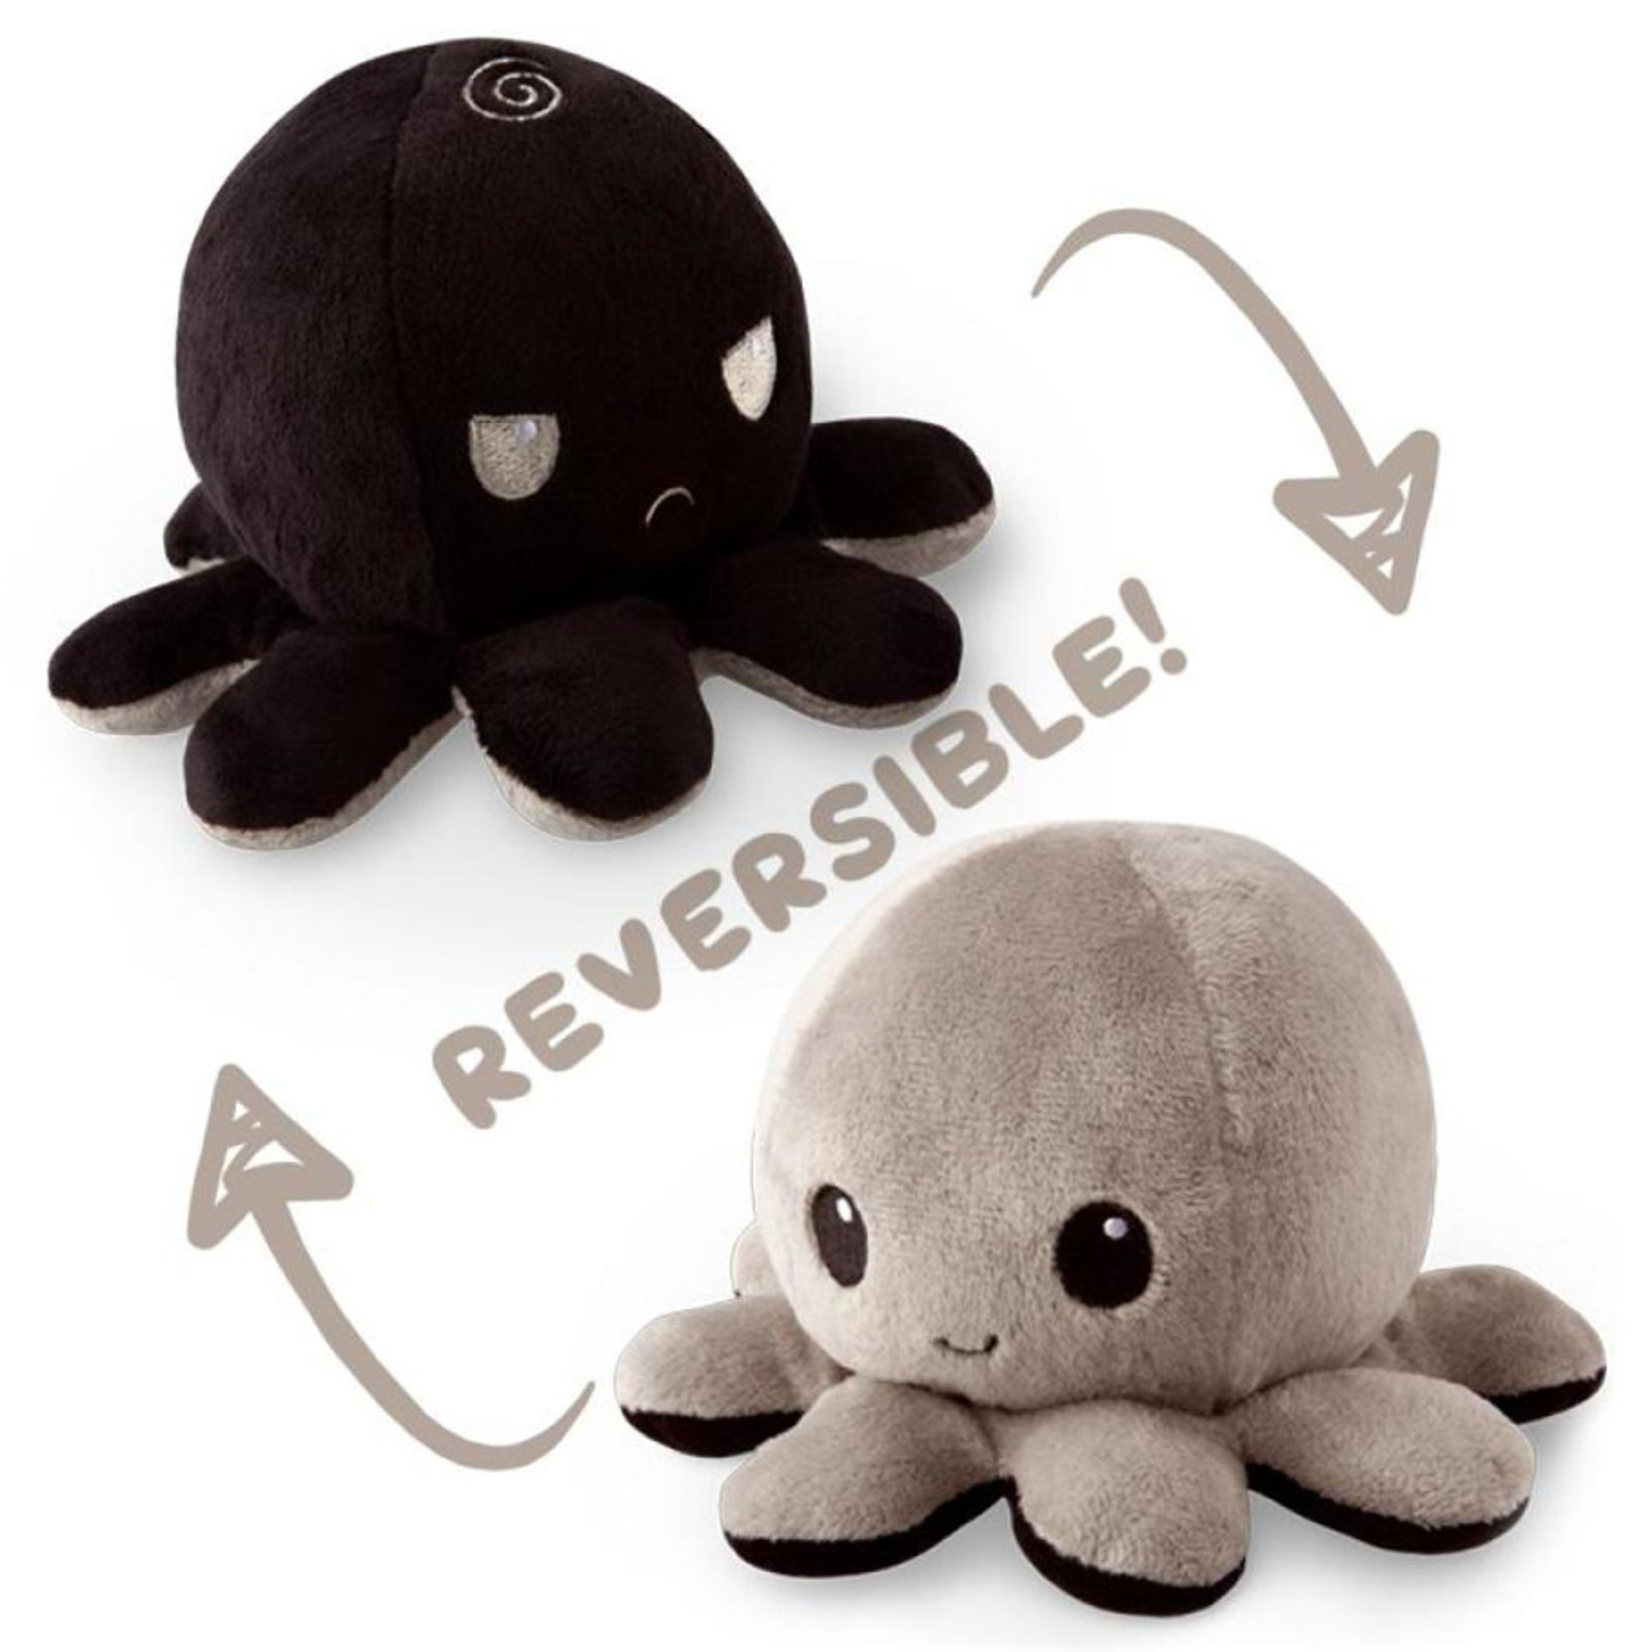 Tee Turtle Reversible Octopus Plushie Black and Gray